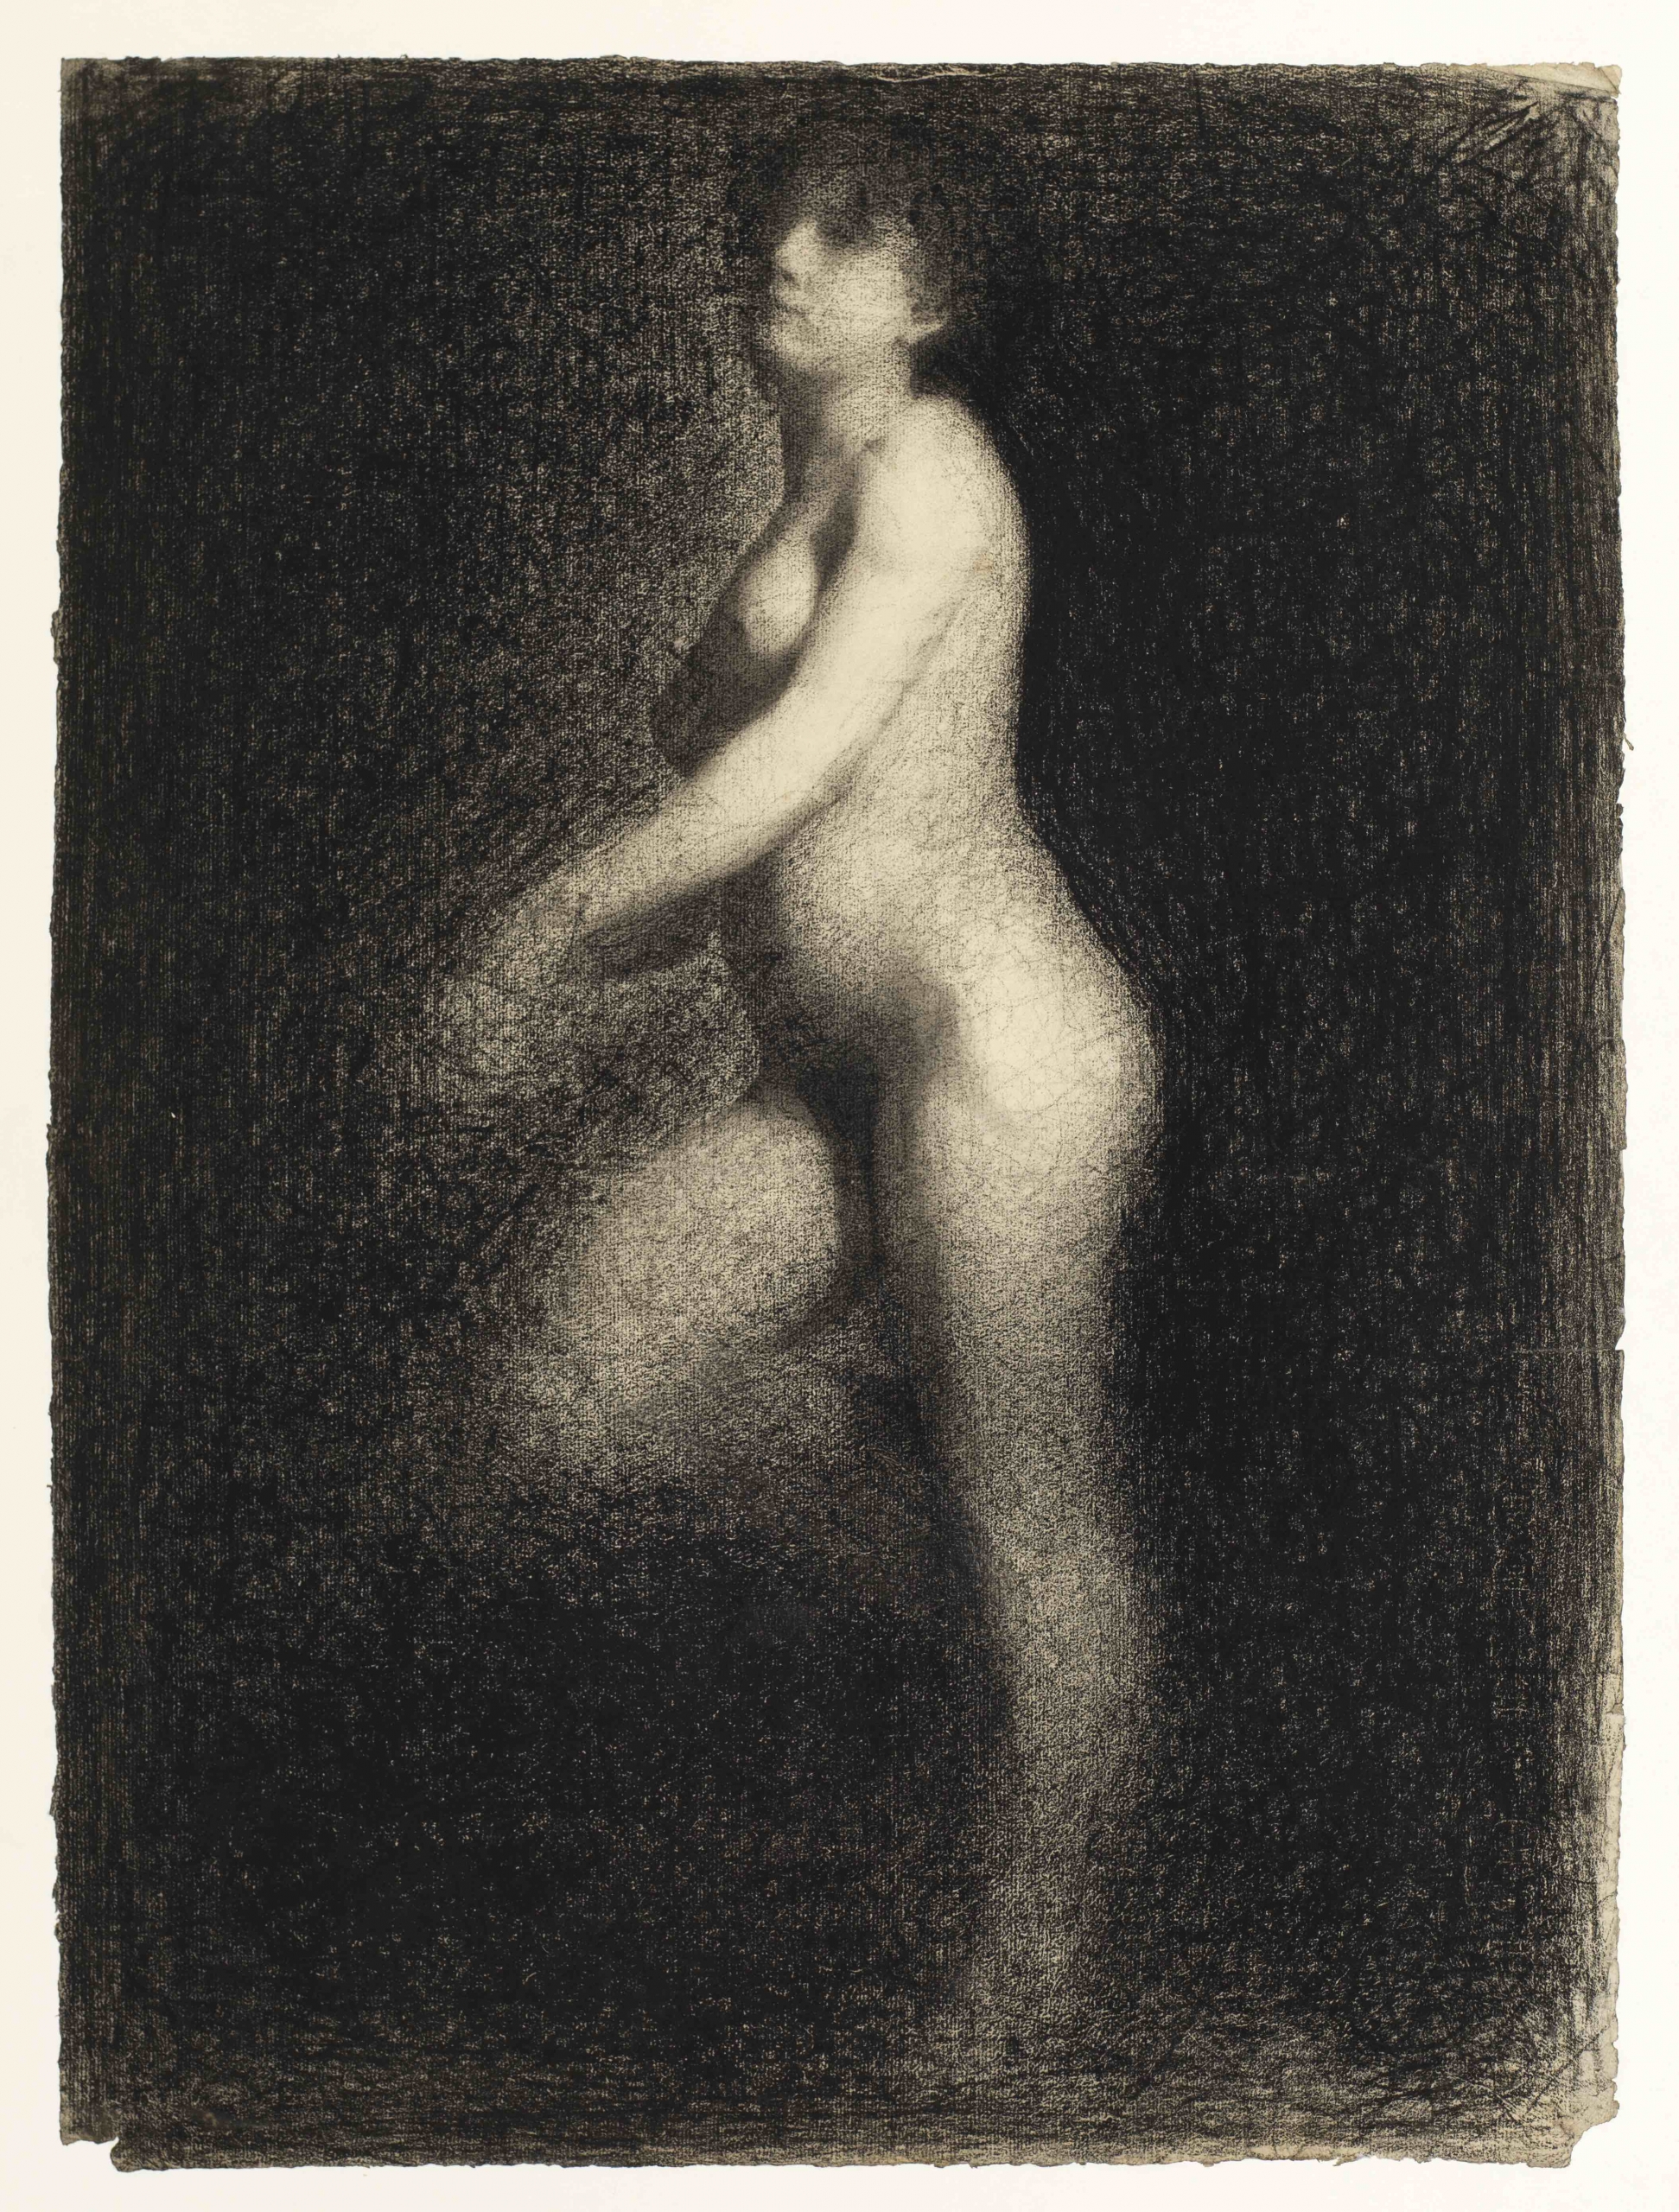 Female Nude - The Courtauld